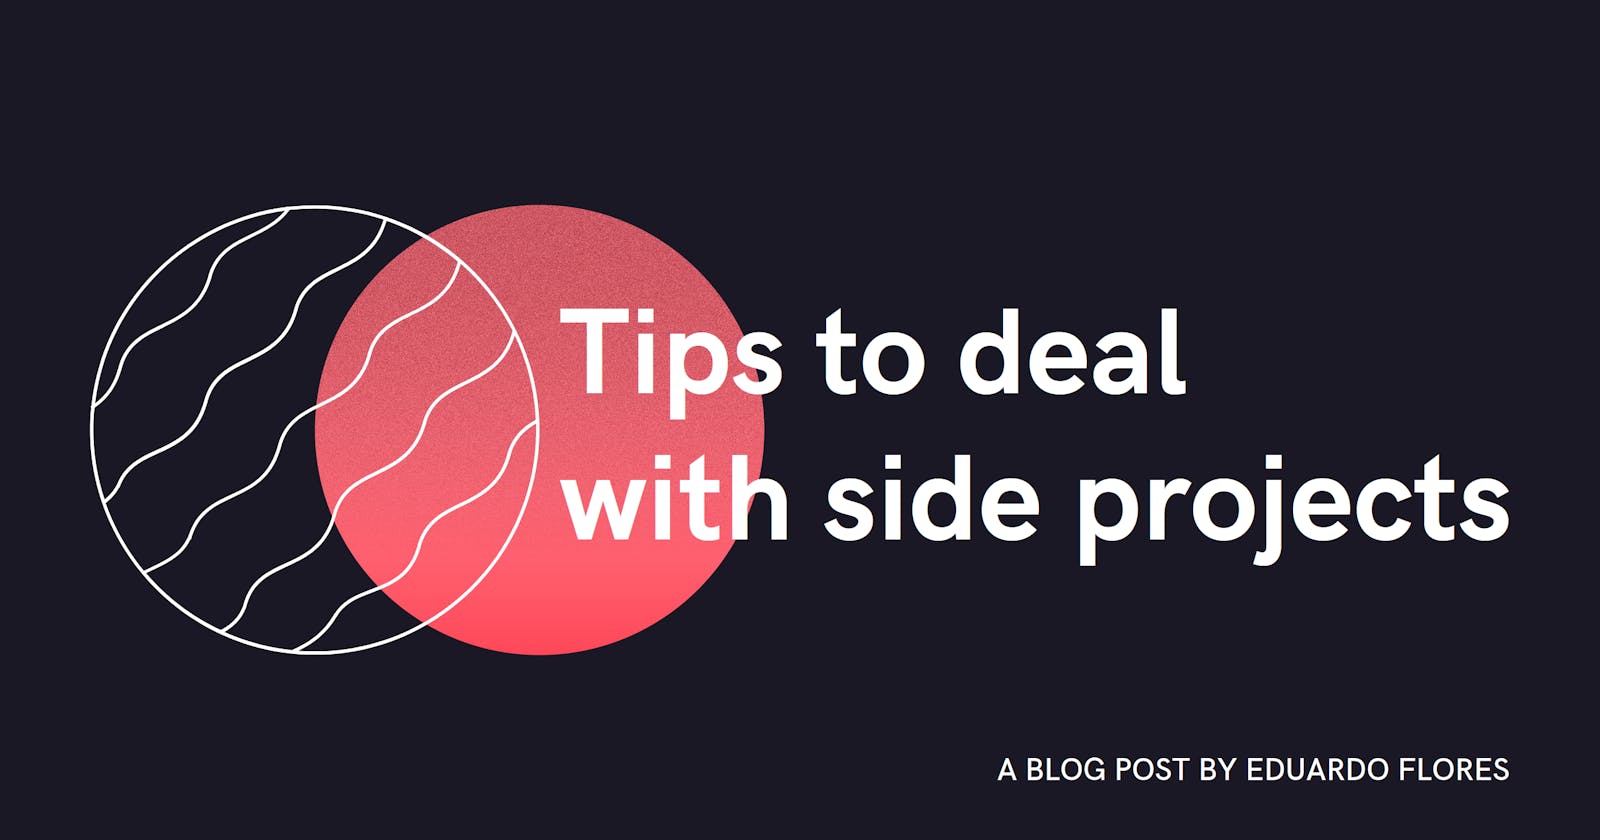 Tips to deal with side projects